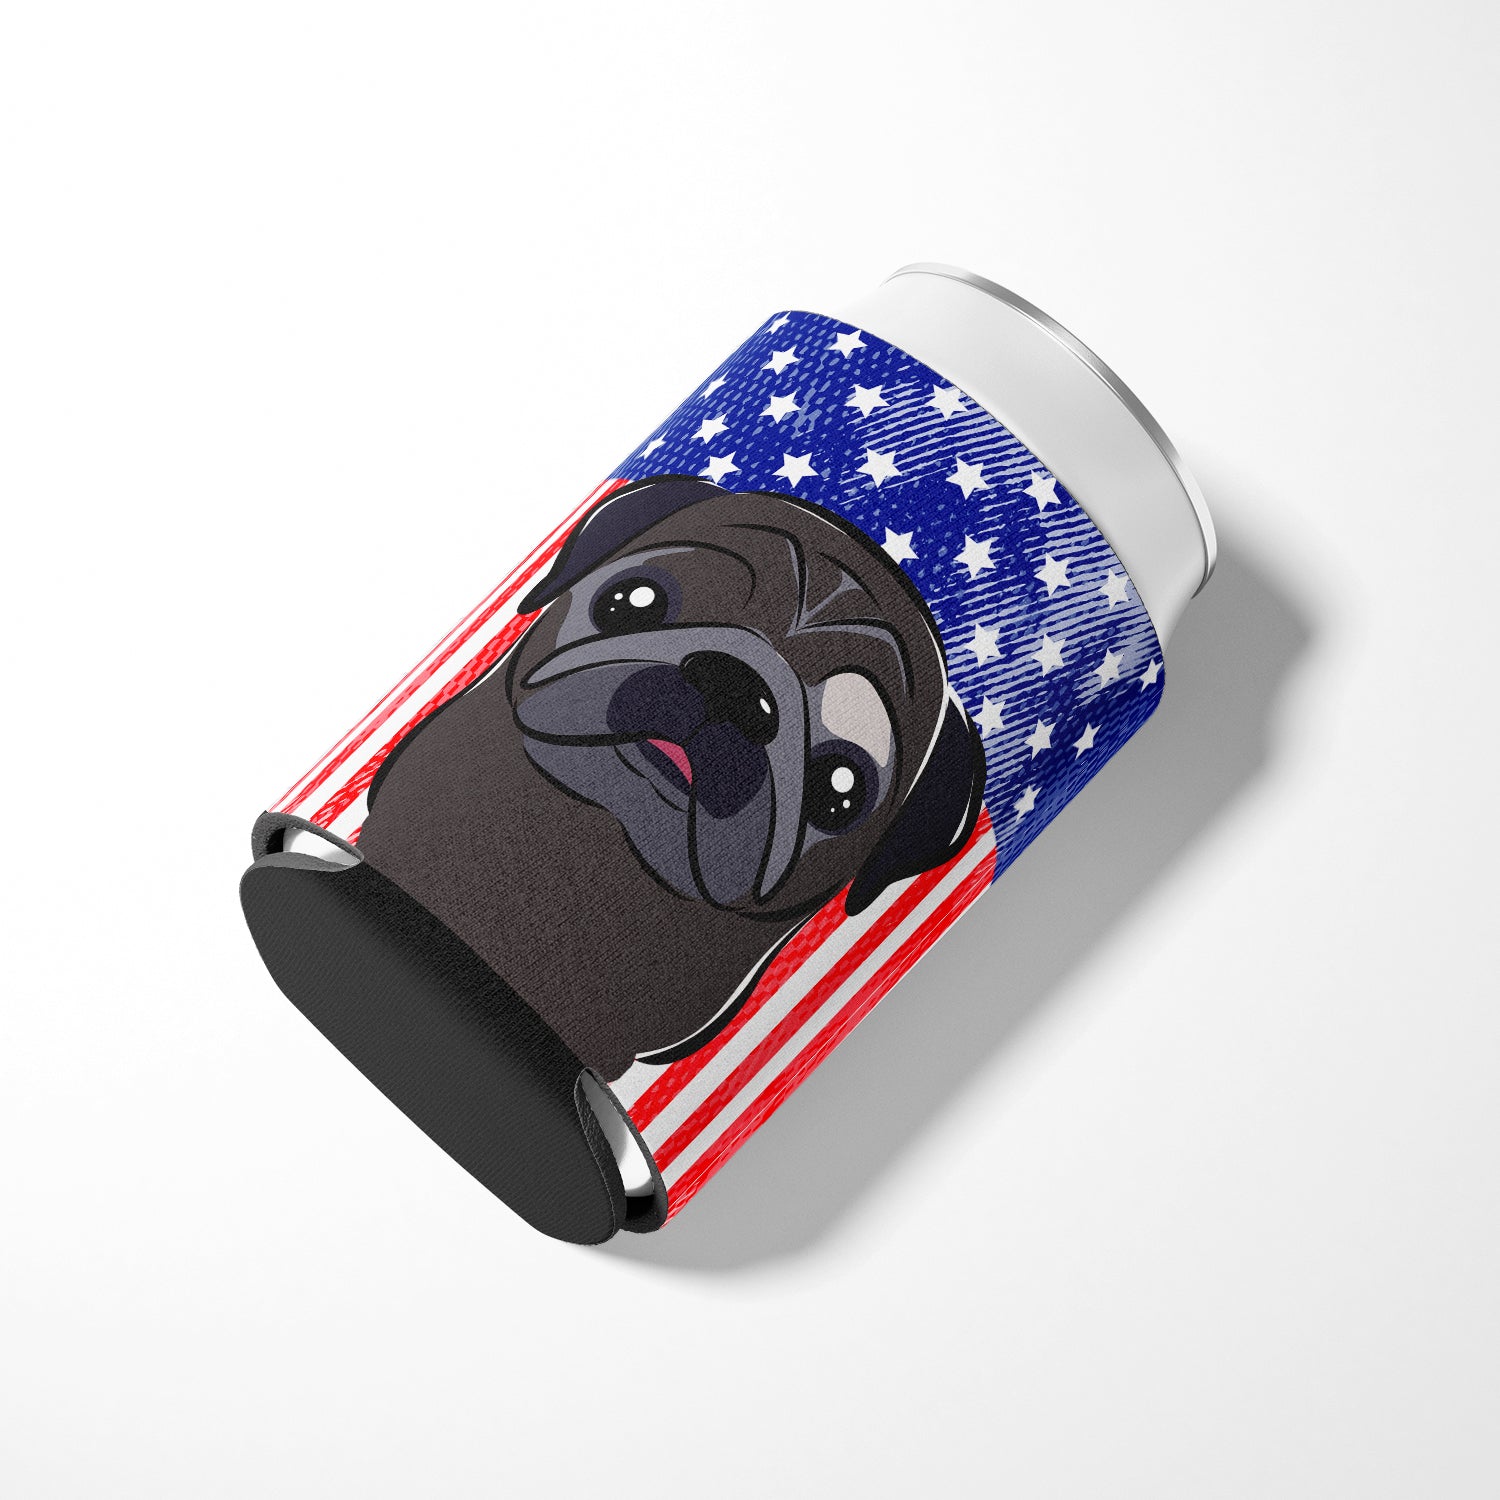 American Flag and Black Pug Can or Bottle Hugger BB2193CC.